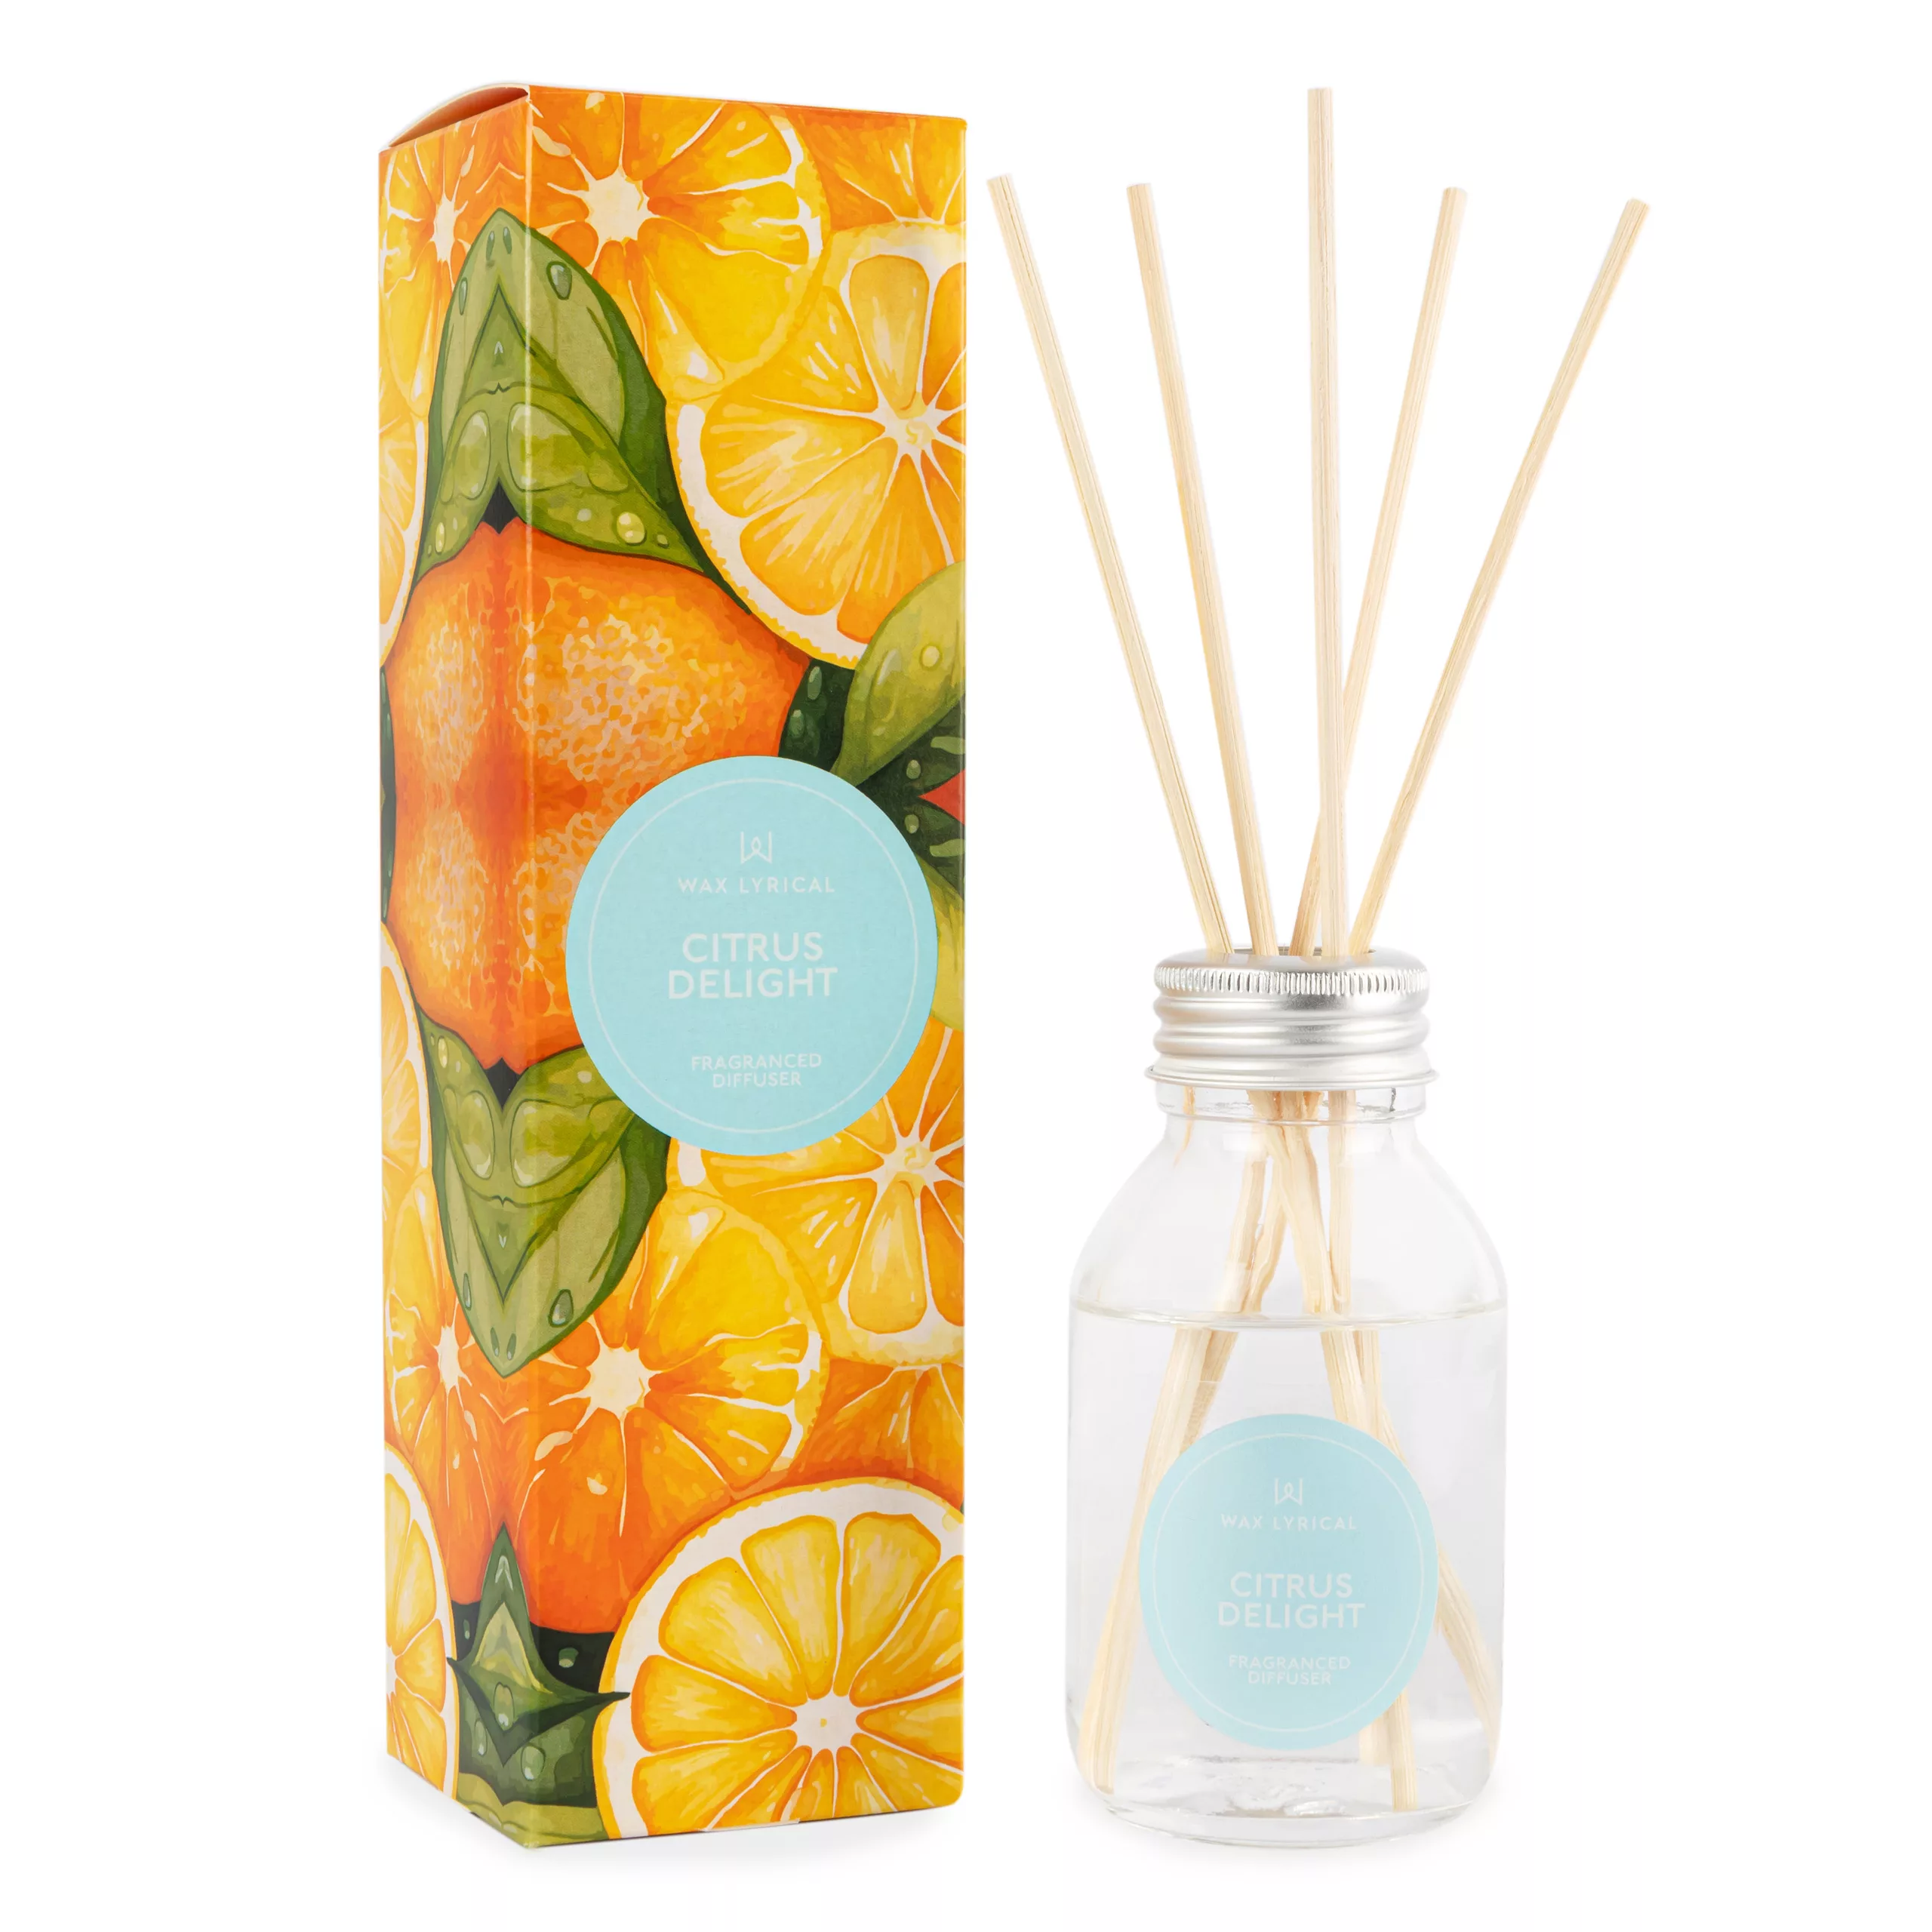 Wax Lyrical Citrus Delight 100ml Reed Diffuser